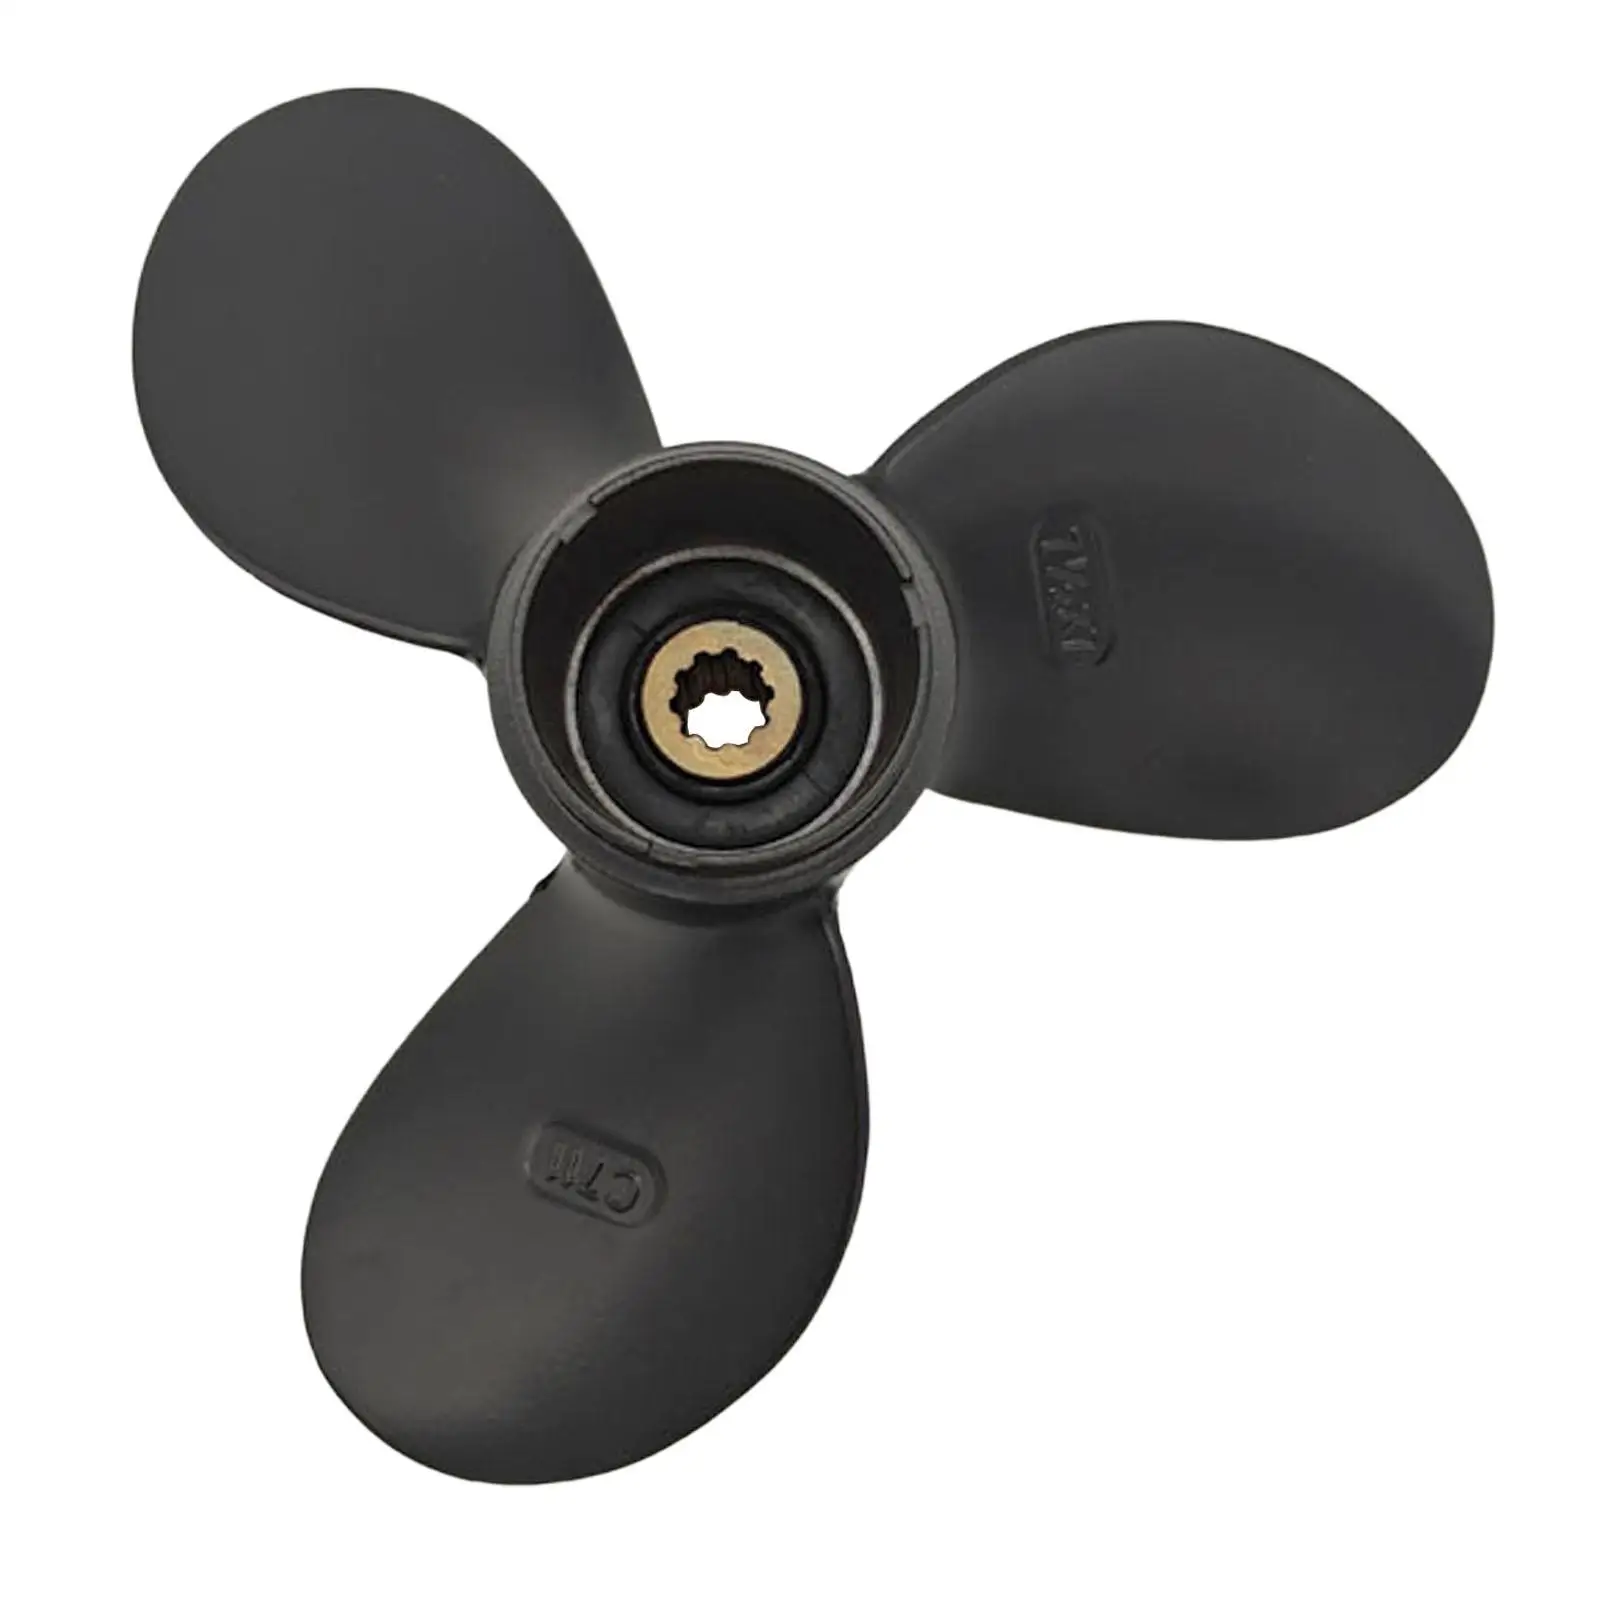 Marine Propeller 7 1/2x7 58111-98651-019 Replaces Durable Black Color